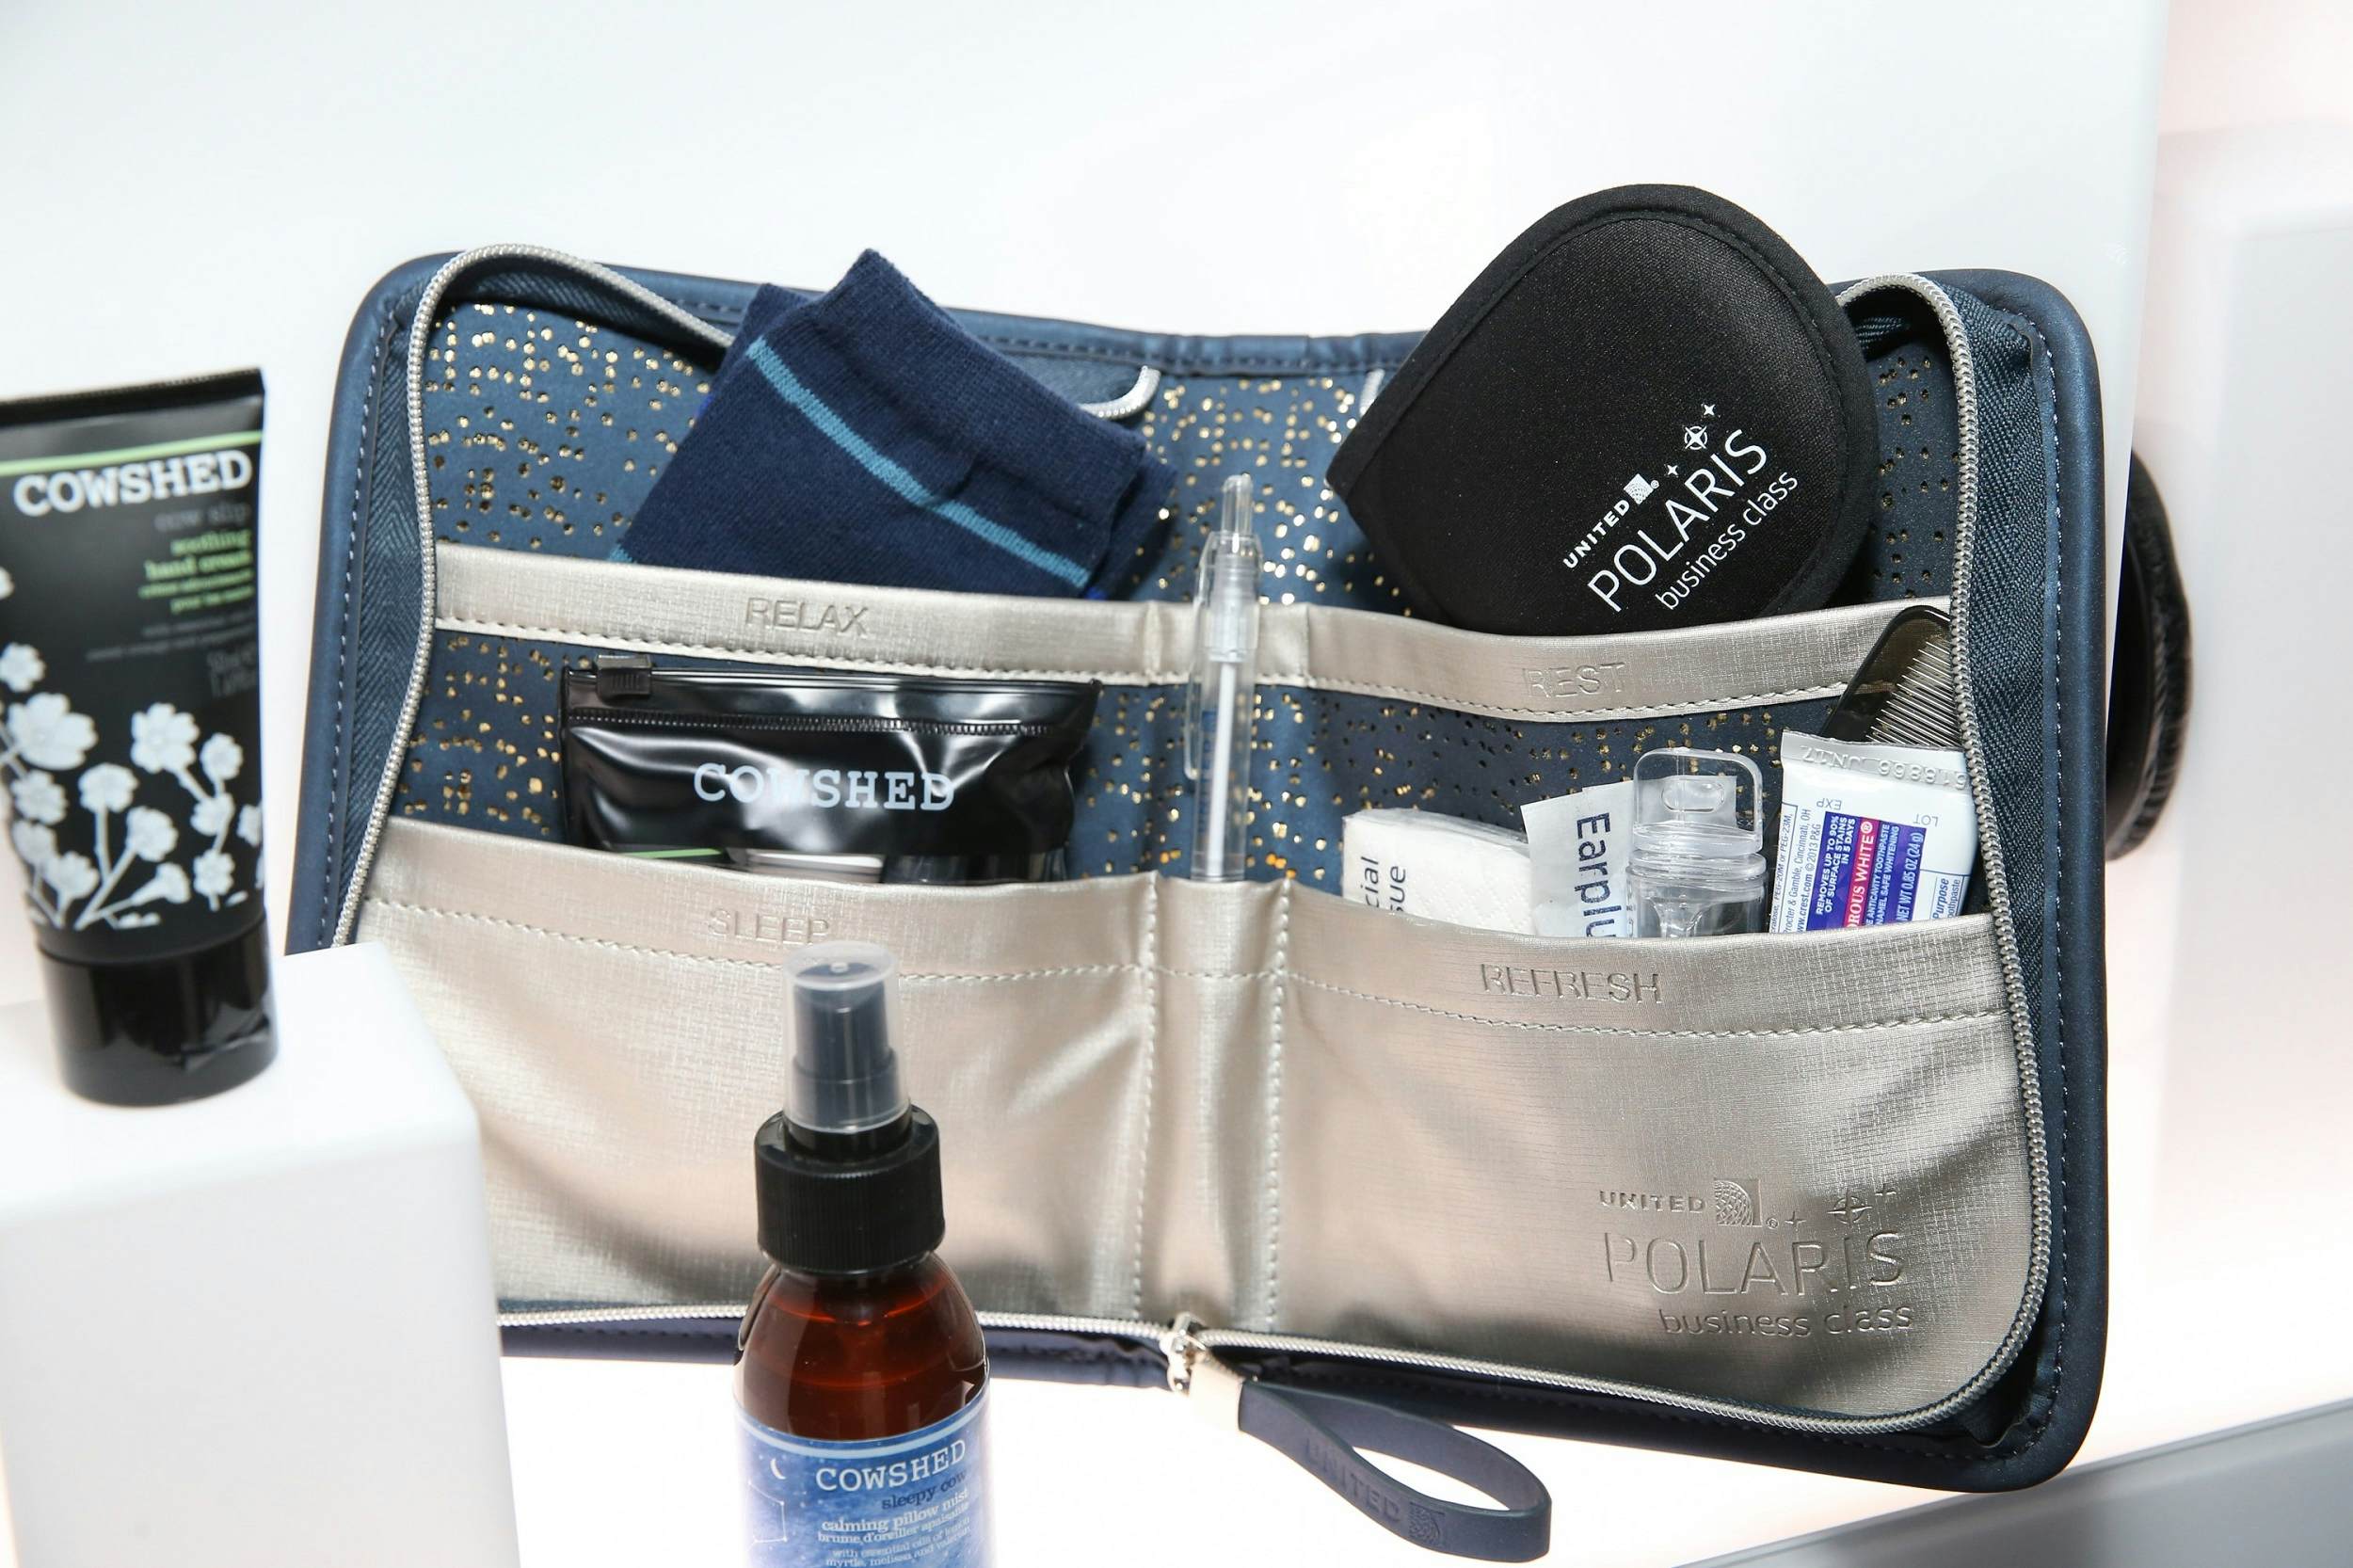 Review: American Business Class Amenity Kits for 2019 - Travel Codex